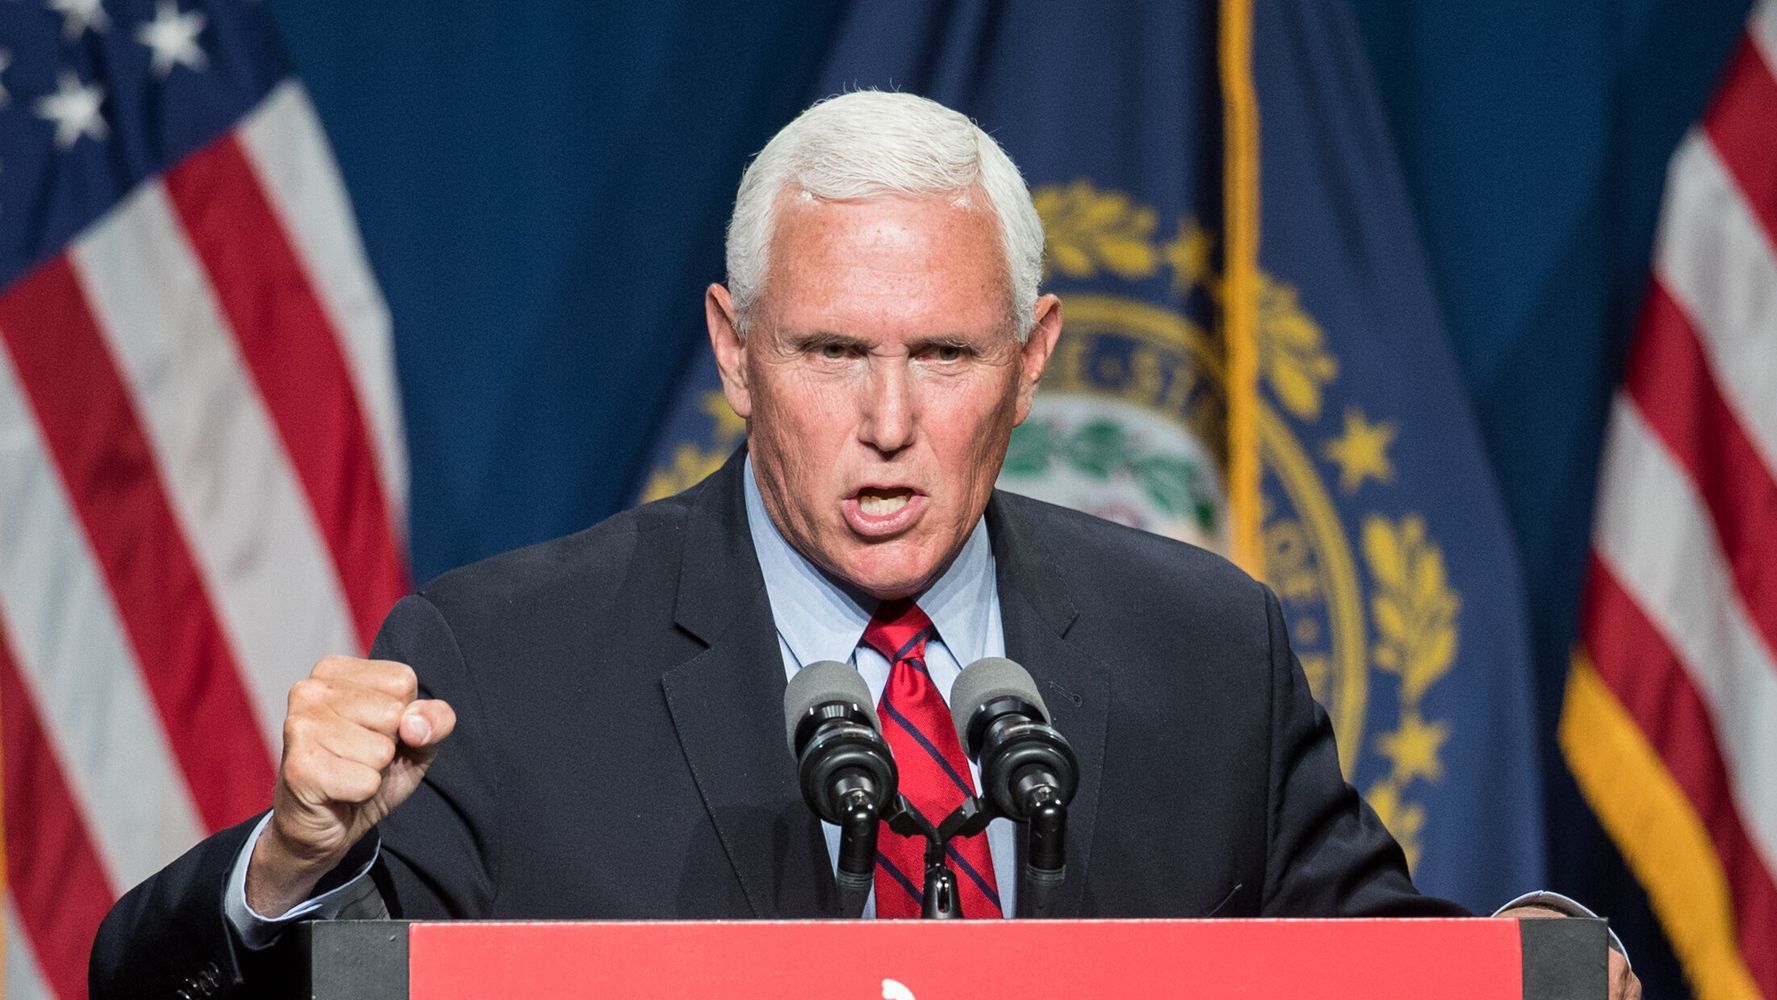 Mike Pence Calls Systemic Racism A 'Left-Wing Myth' At Republican Event